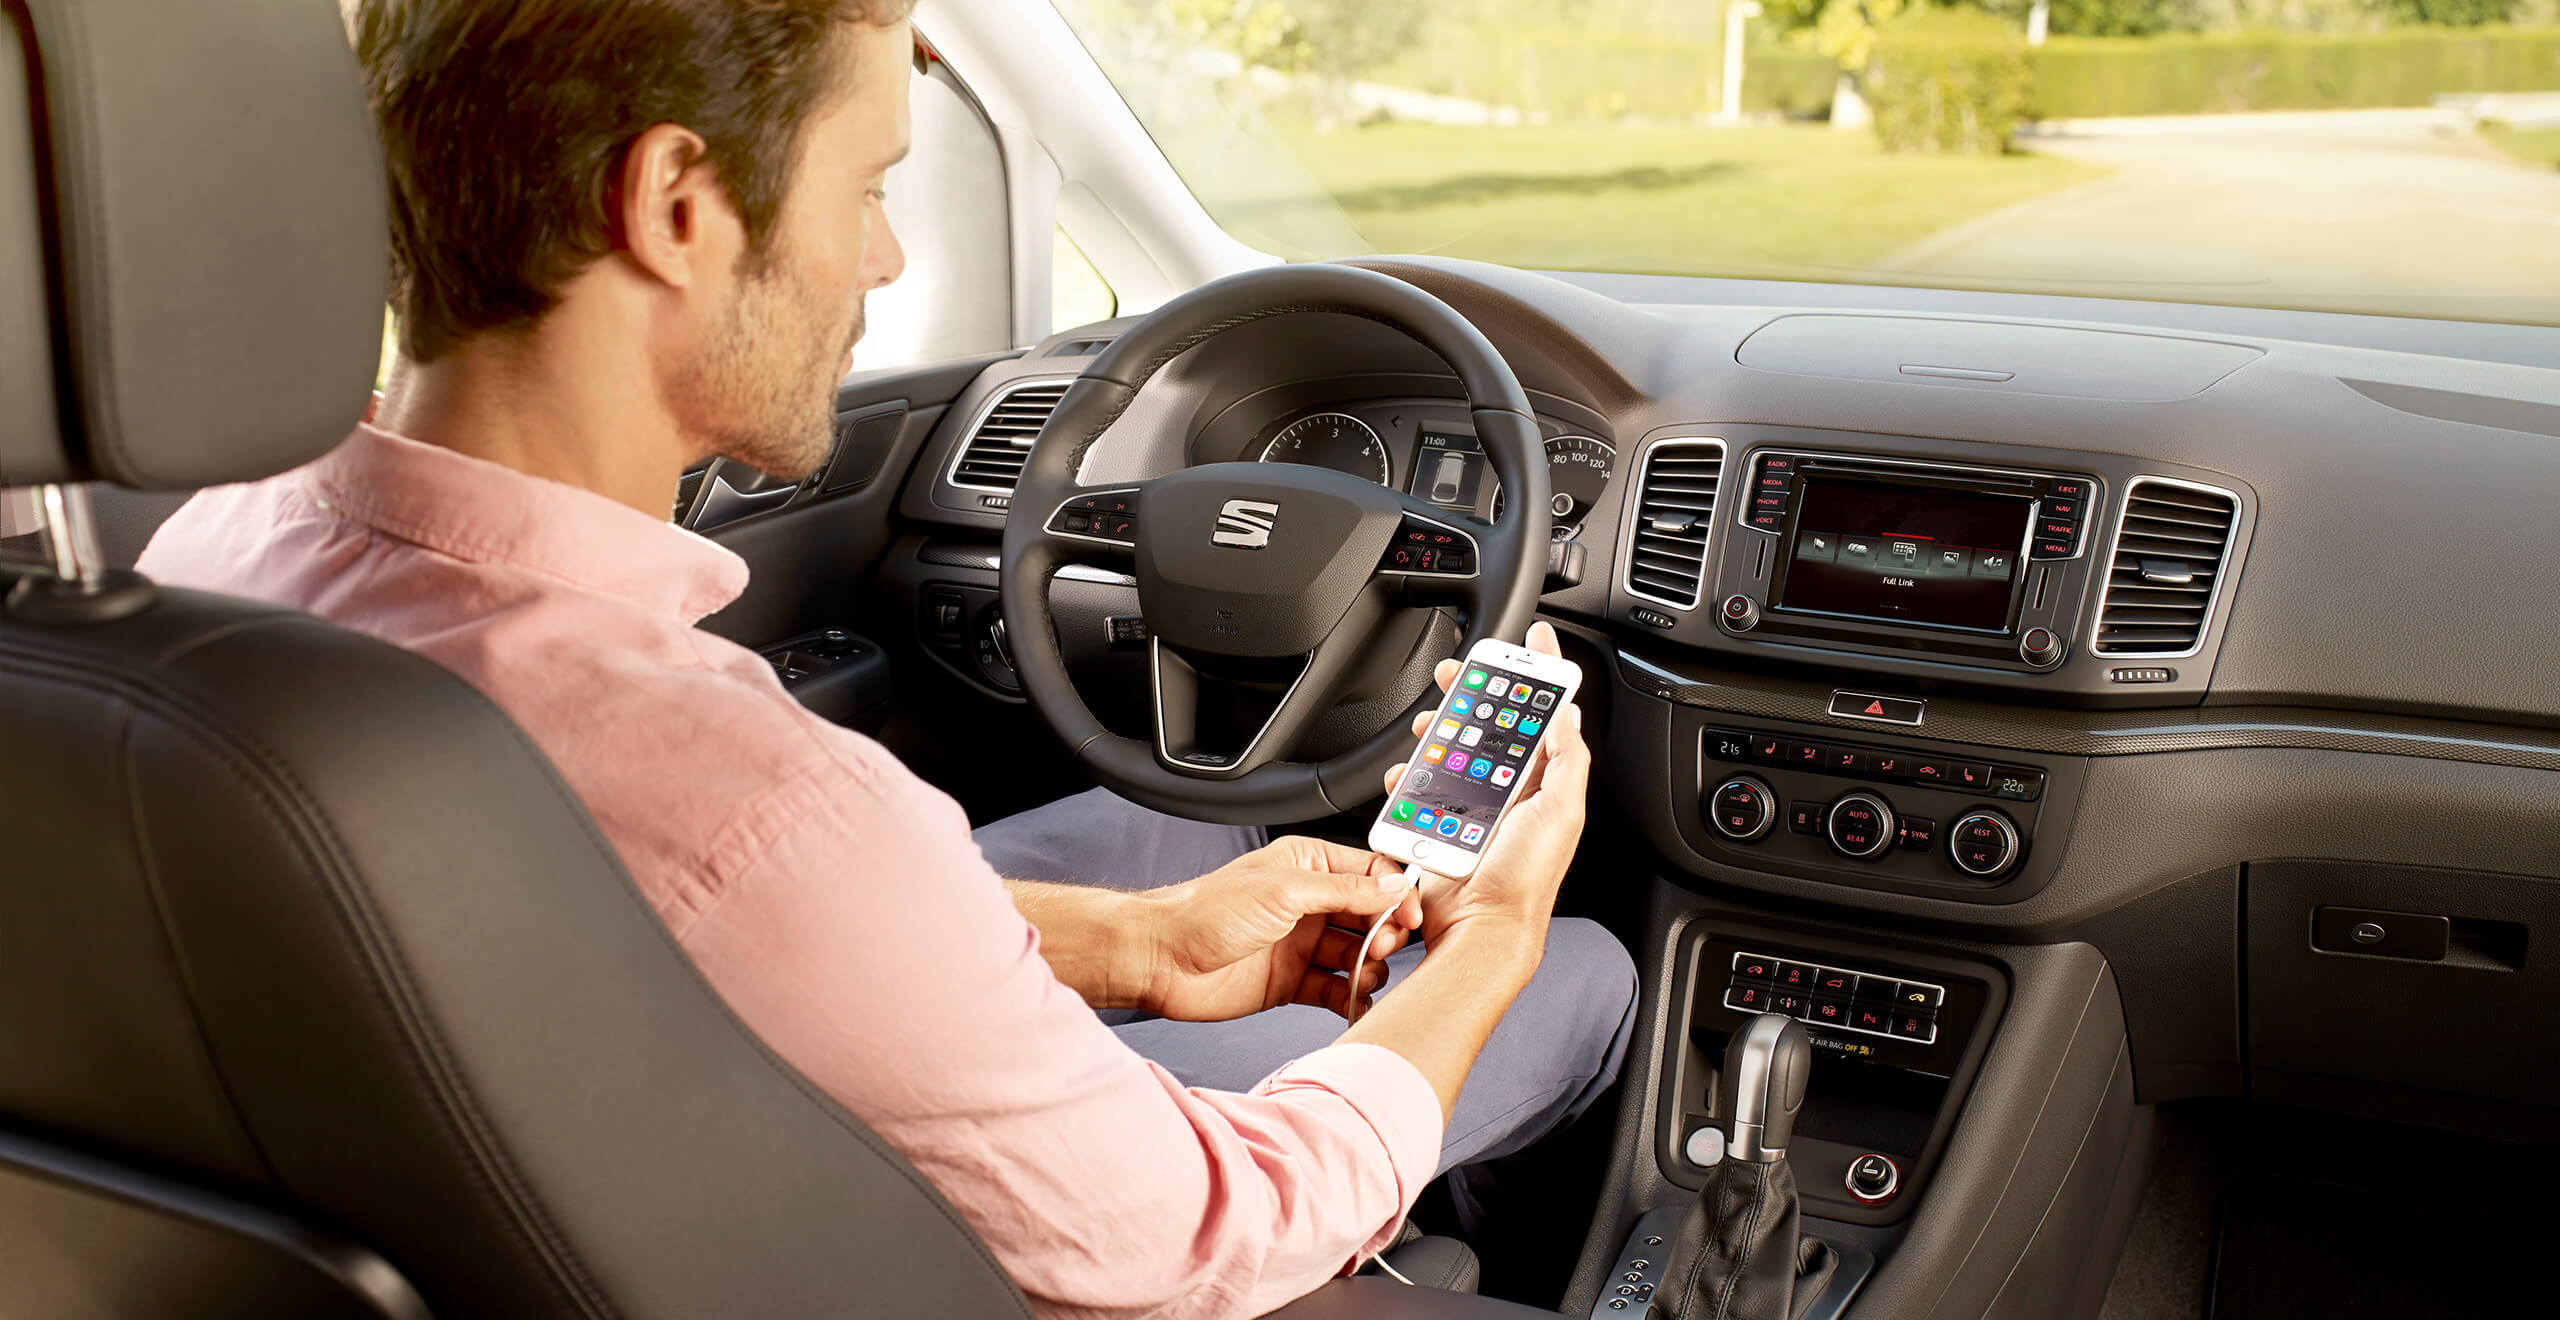 SEAT Alhambra innovation and safety accessories. SEAT Full Link Technology for mobile and smartphones car connection